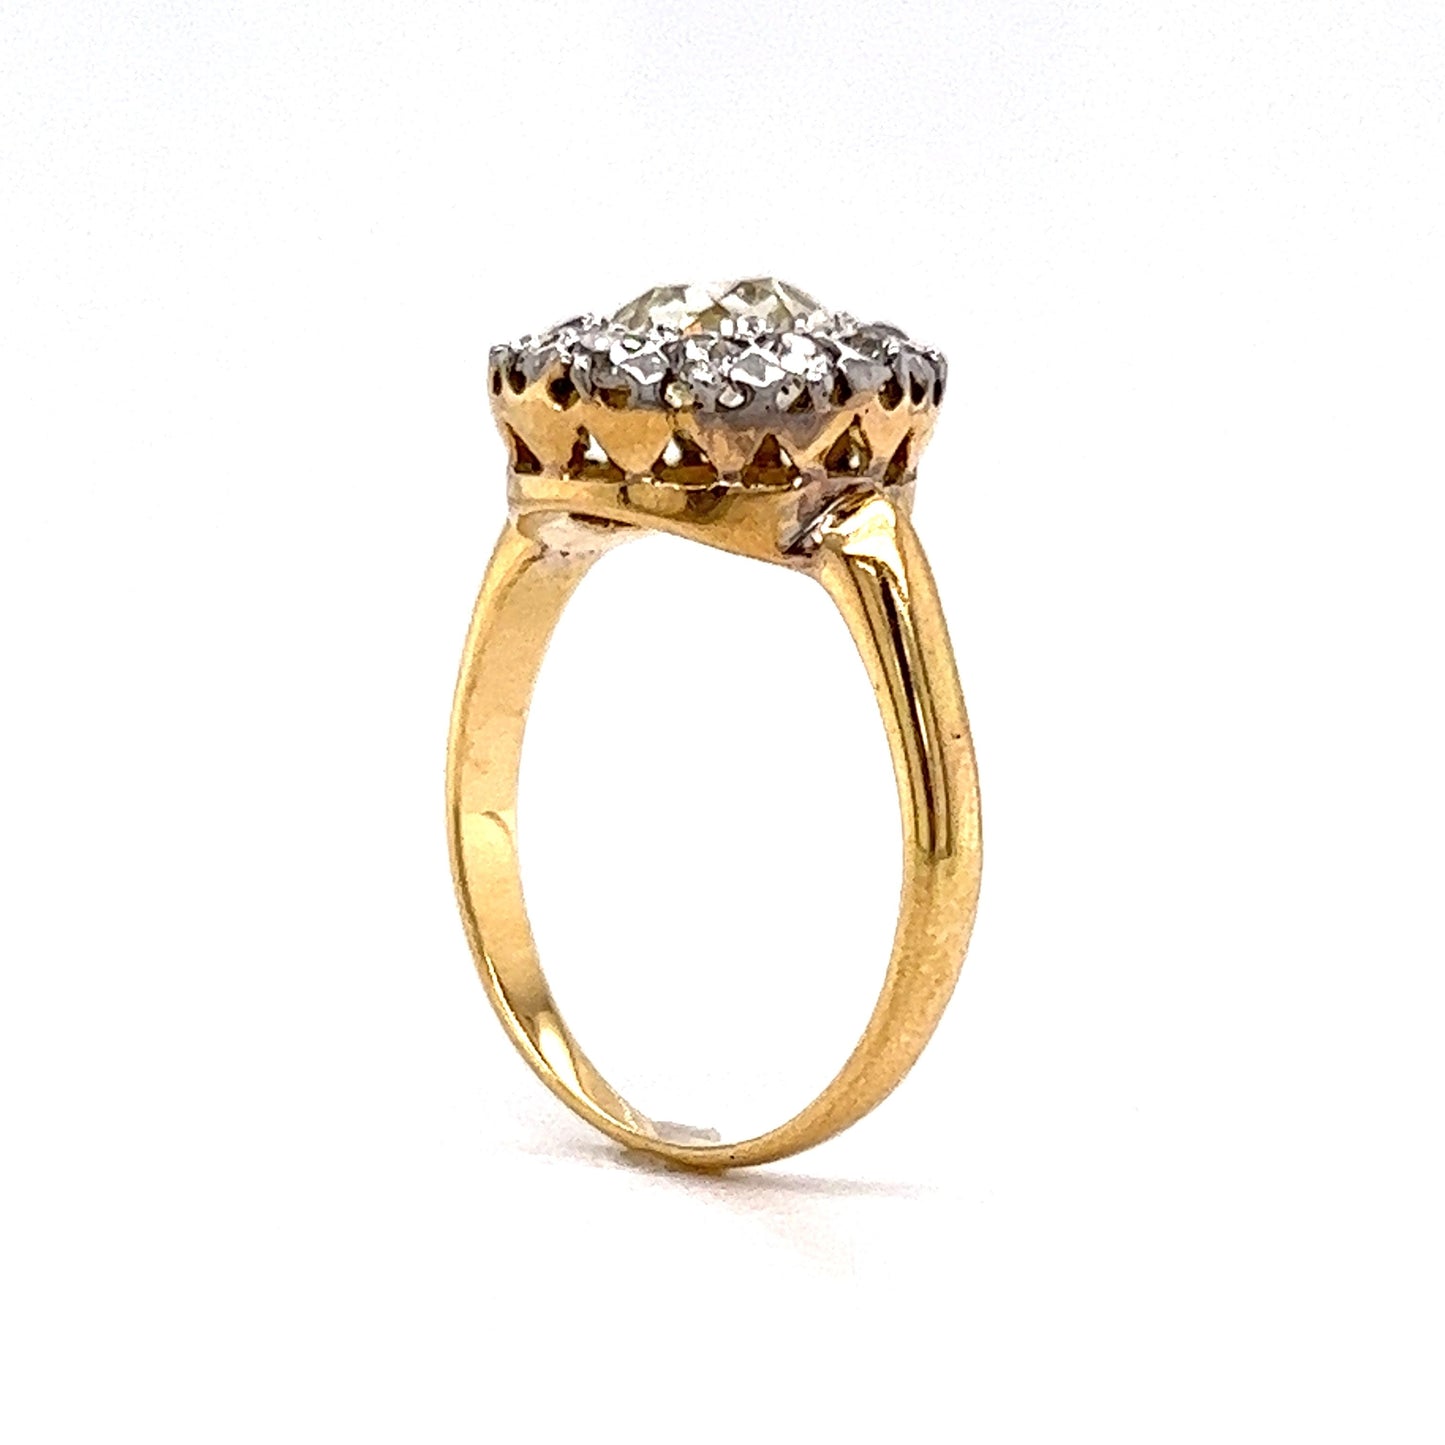 Victorian 1.39 Diamond Cluster Engagement Ring in 18k Gold